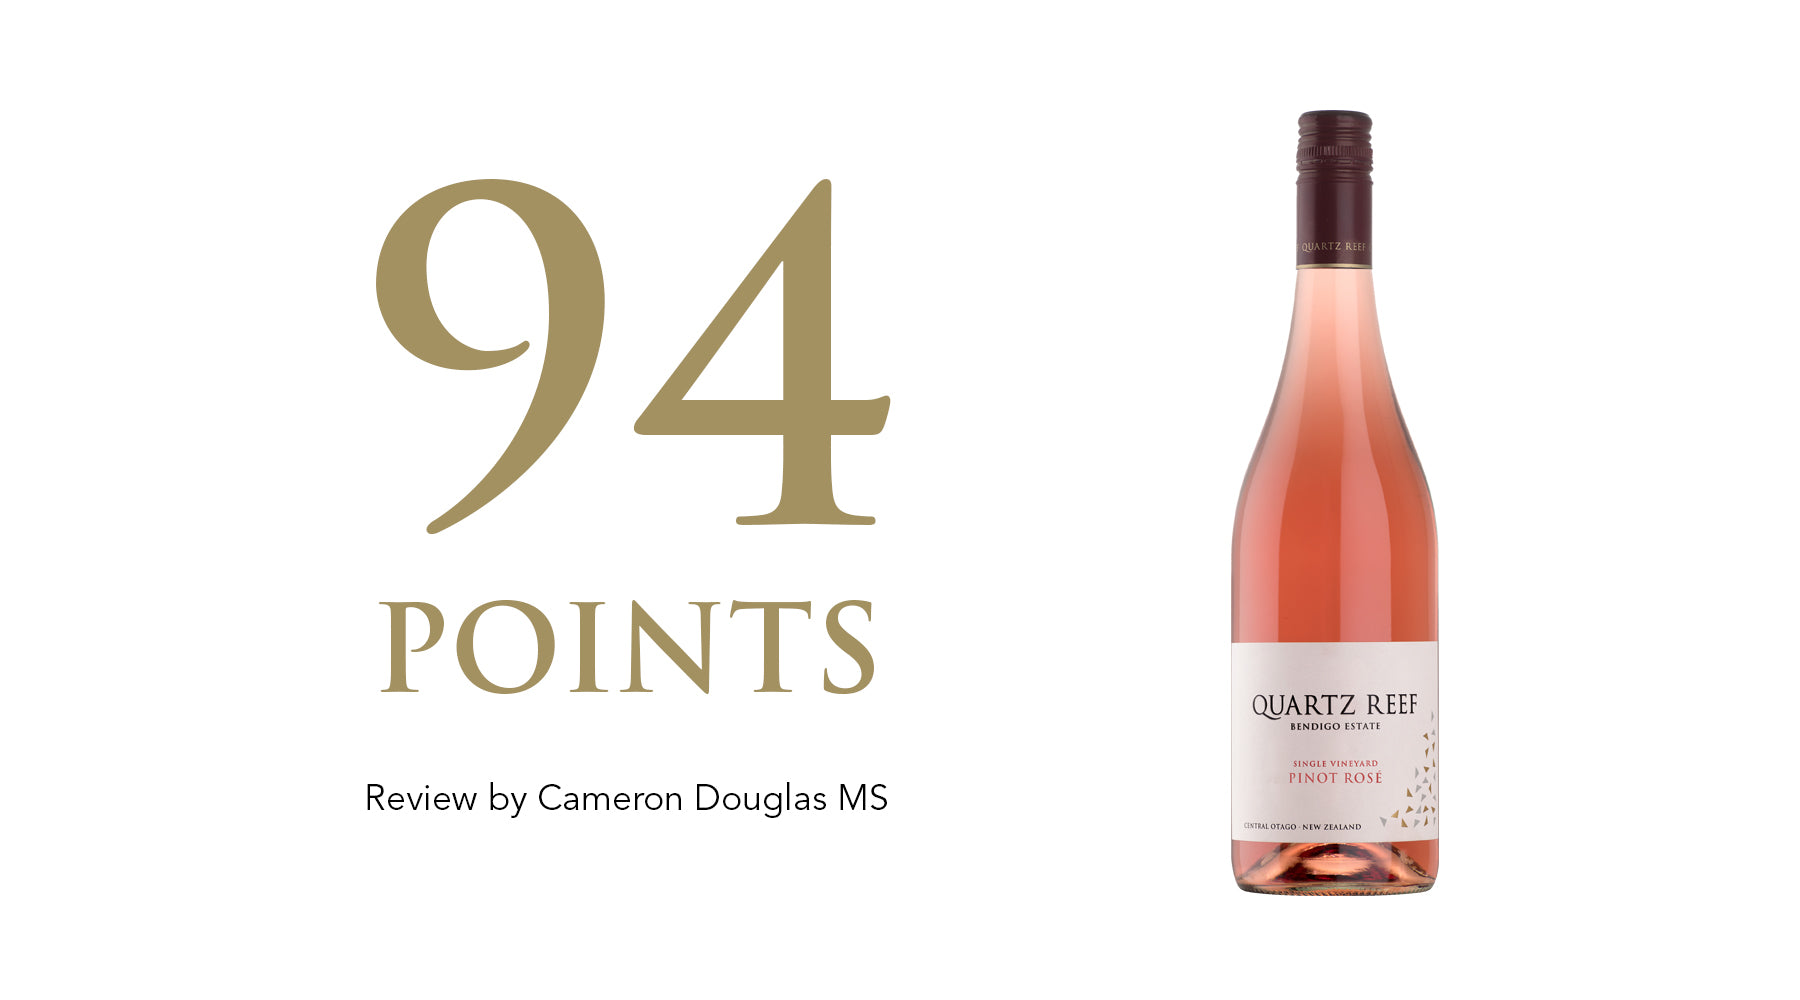 Pinot Rosé 2020 - Awarded 94 Points